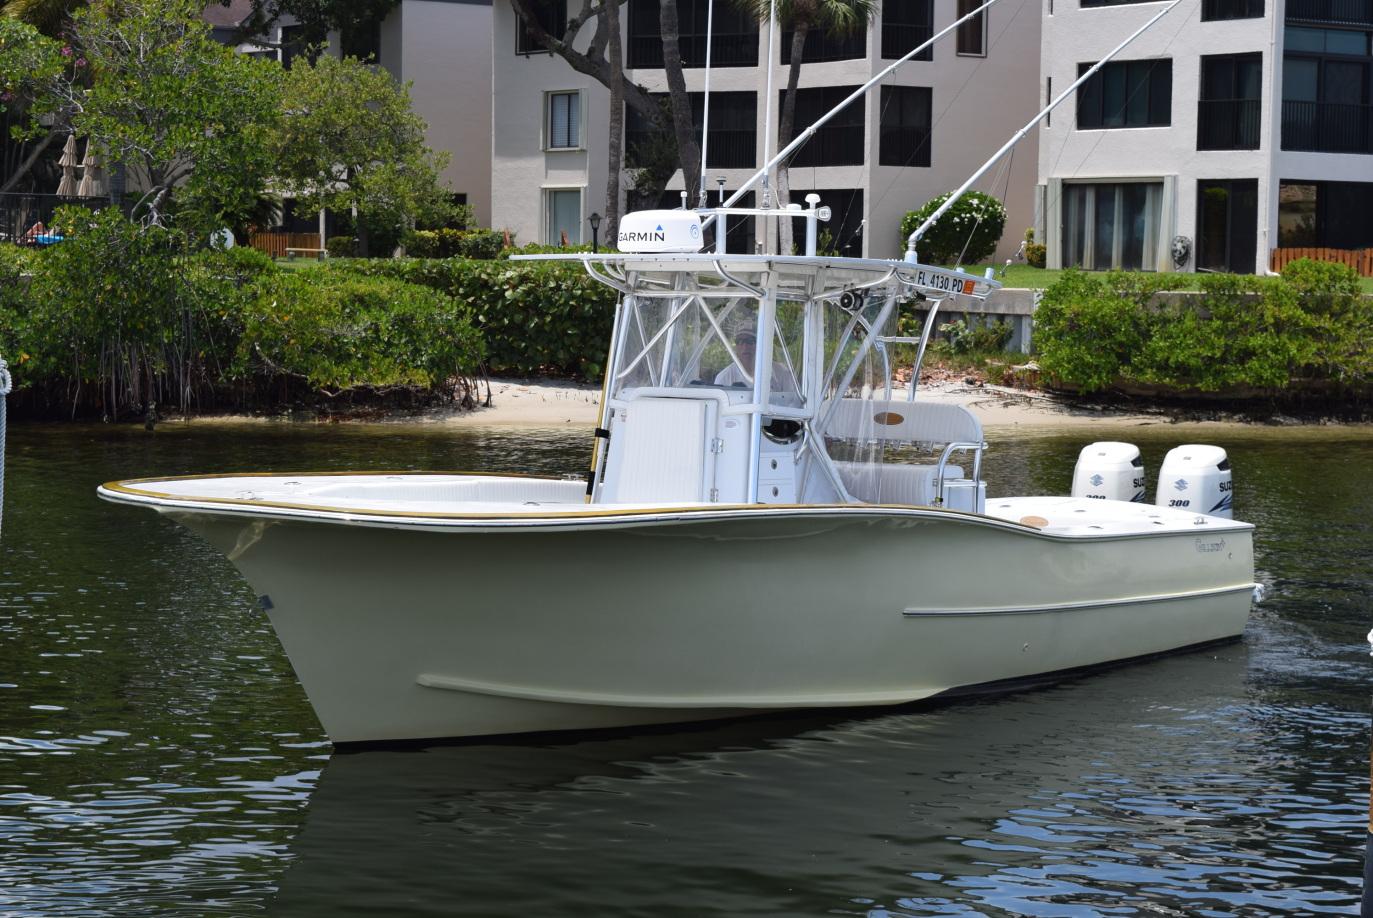 Gillikin 33 - Exterior profile on the water